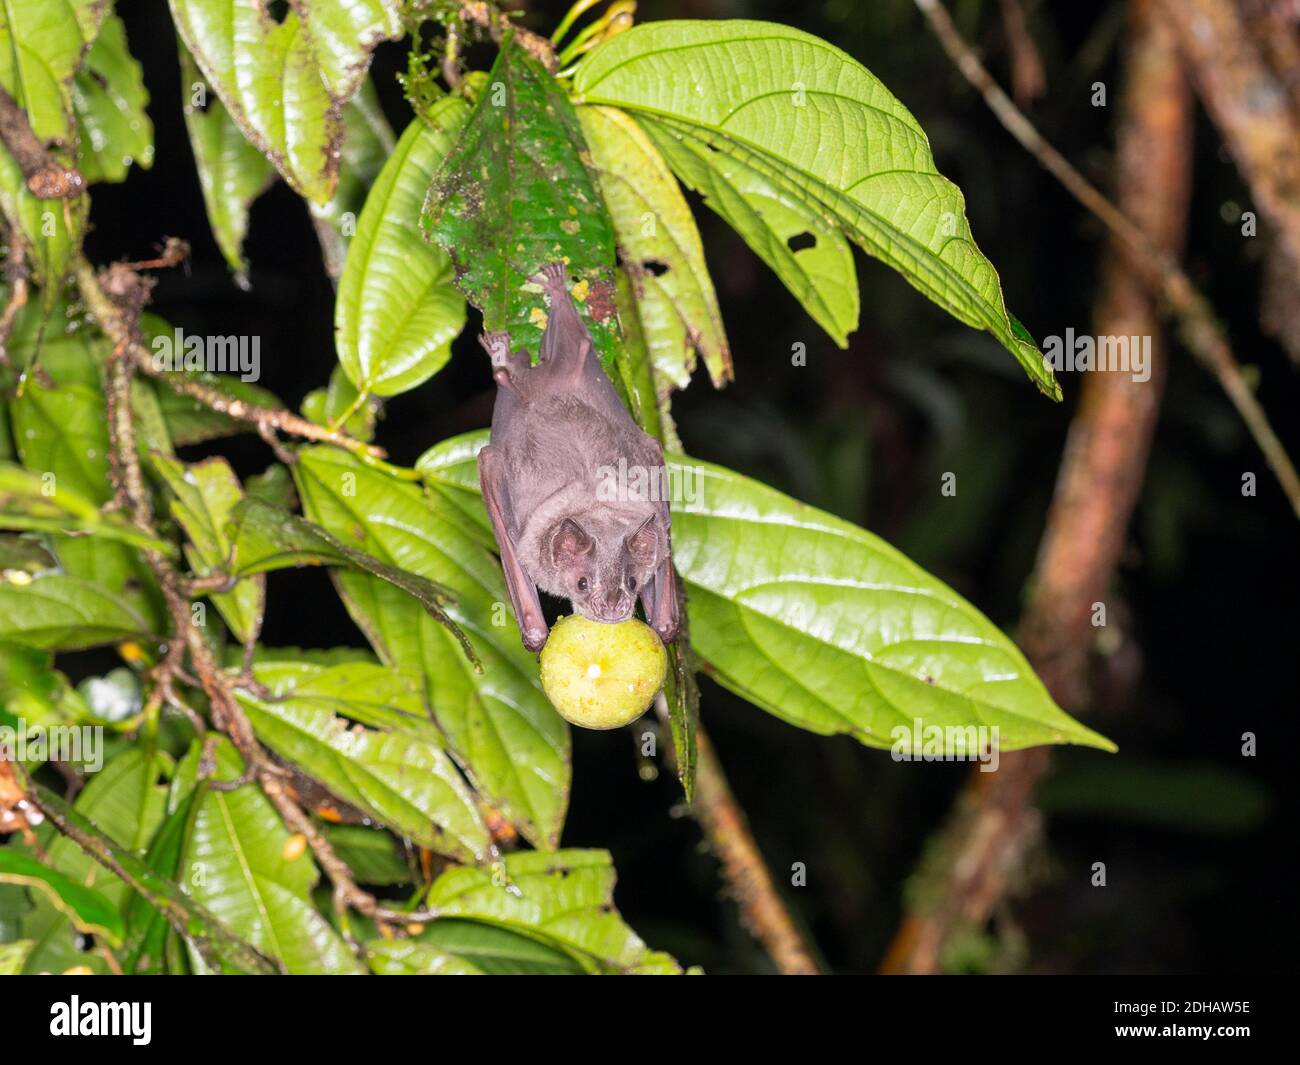 Frugivorous bat (Artibeus sp.) hanging in the rainforest understory holding a fruit in its mouth. Yasuni National Park, Ecuador, April 2019. Stock Photo